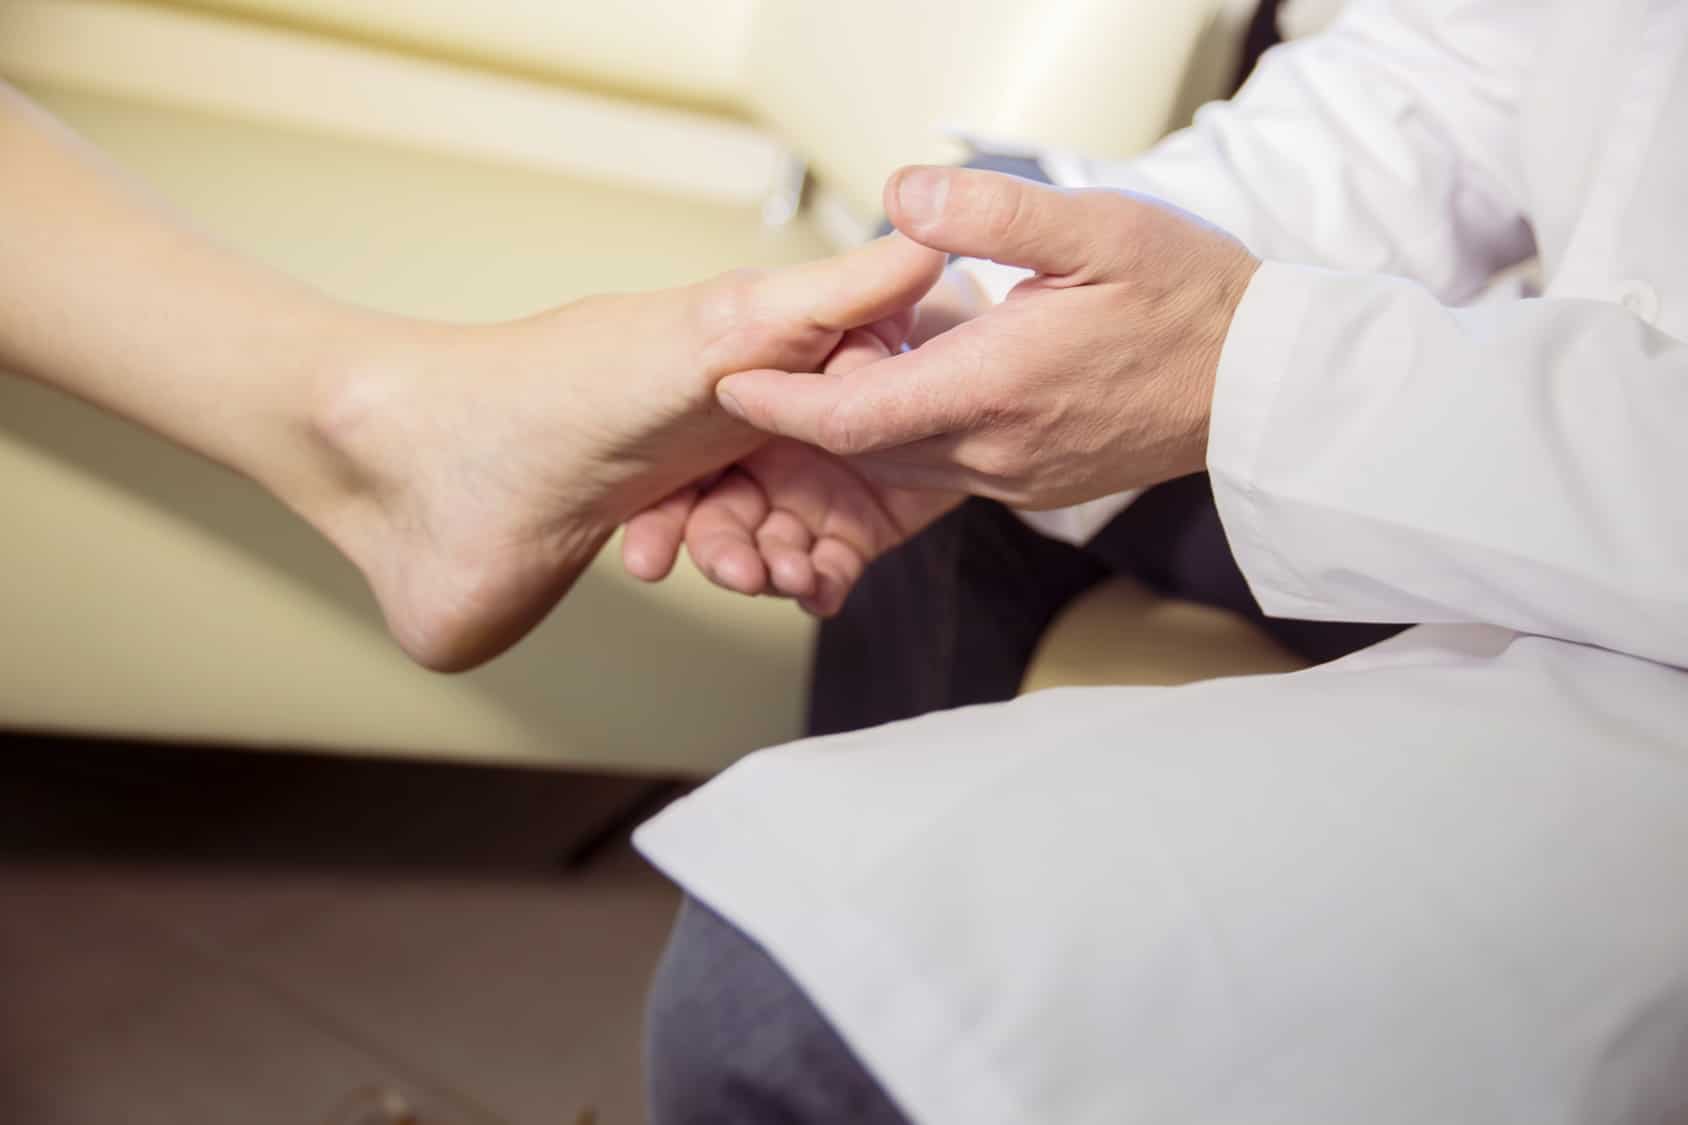 Vascular Doctors Working with Podiatrists & Wound Care Physicians